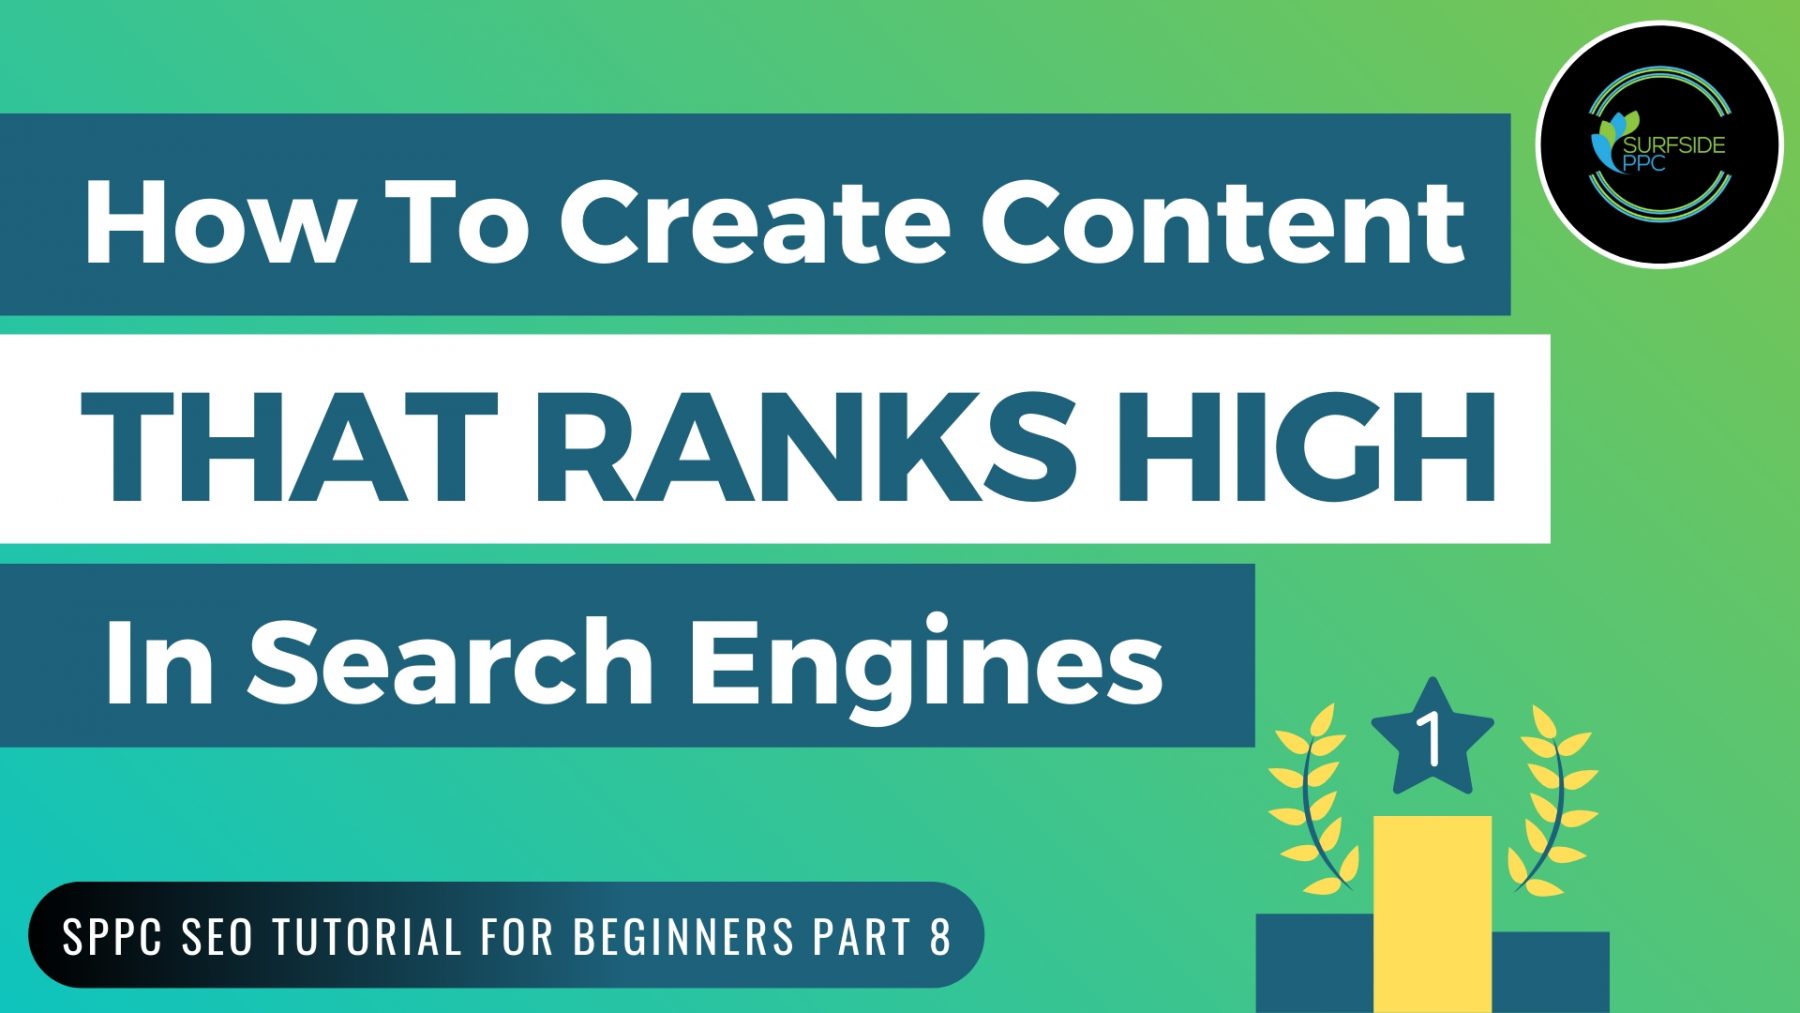 How To Create Content That Ranks High In Search Engines